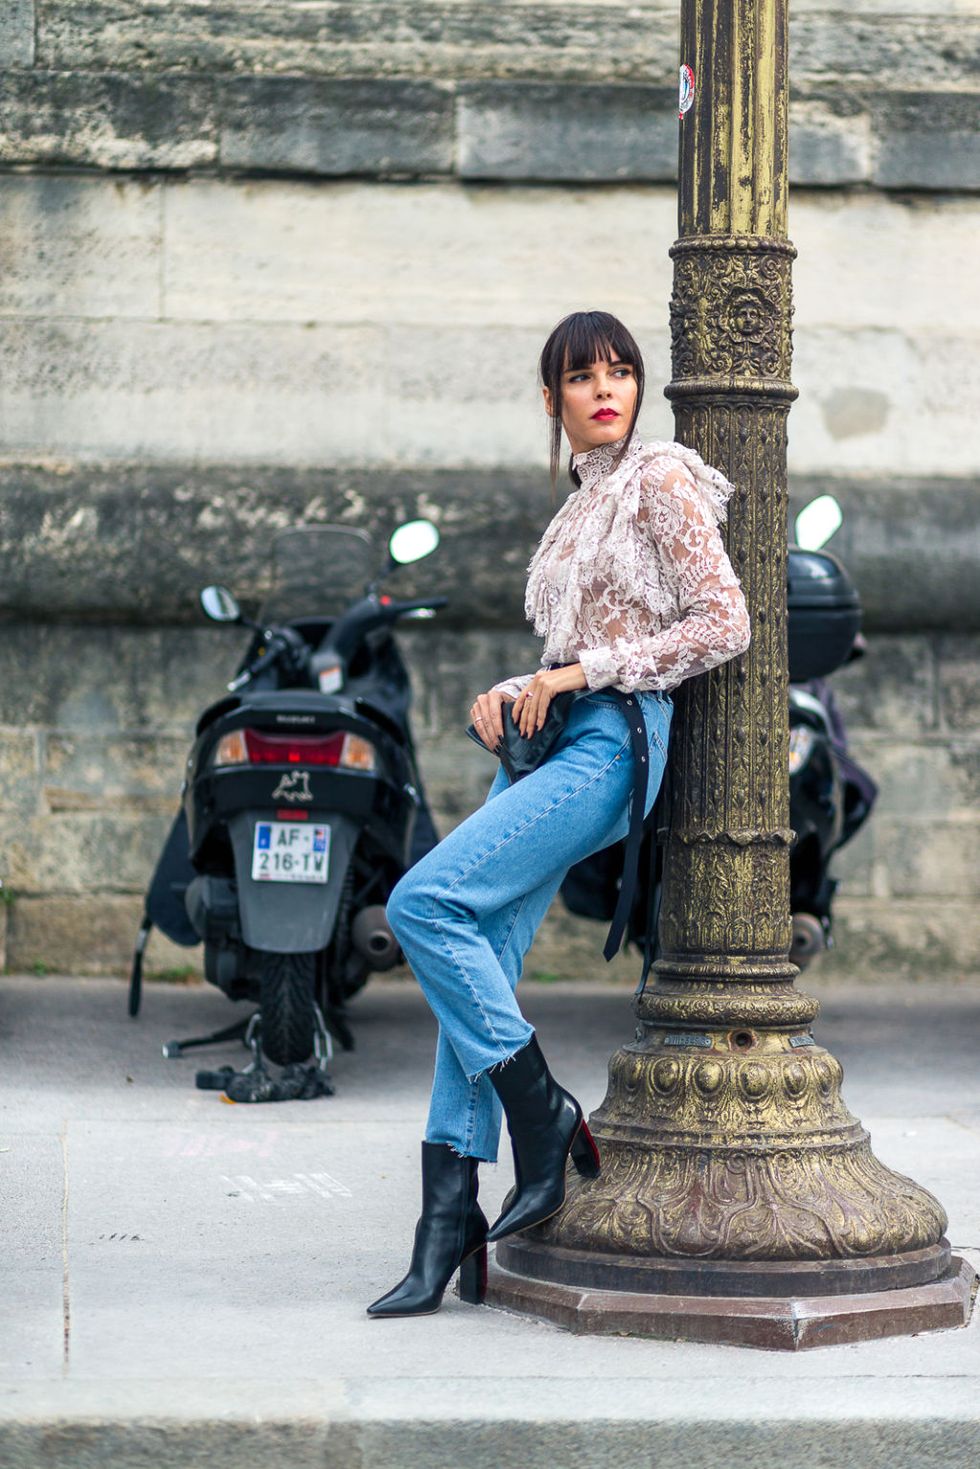 <p>The&nbsp;Styleheroine's&nbsp;Evangelie, waiting for the show while matching this romantic Parisian lamp post with modern&nbsp;style.&nbsp;<span class="redactor-invisible-space" data-verified="redactor" data-redactor-tag="span" data-redactor-class="redactor-invisible-space"></span></p>